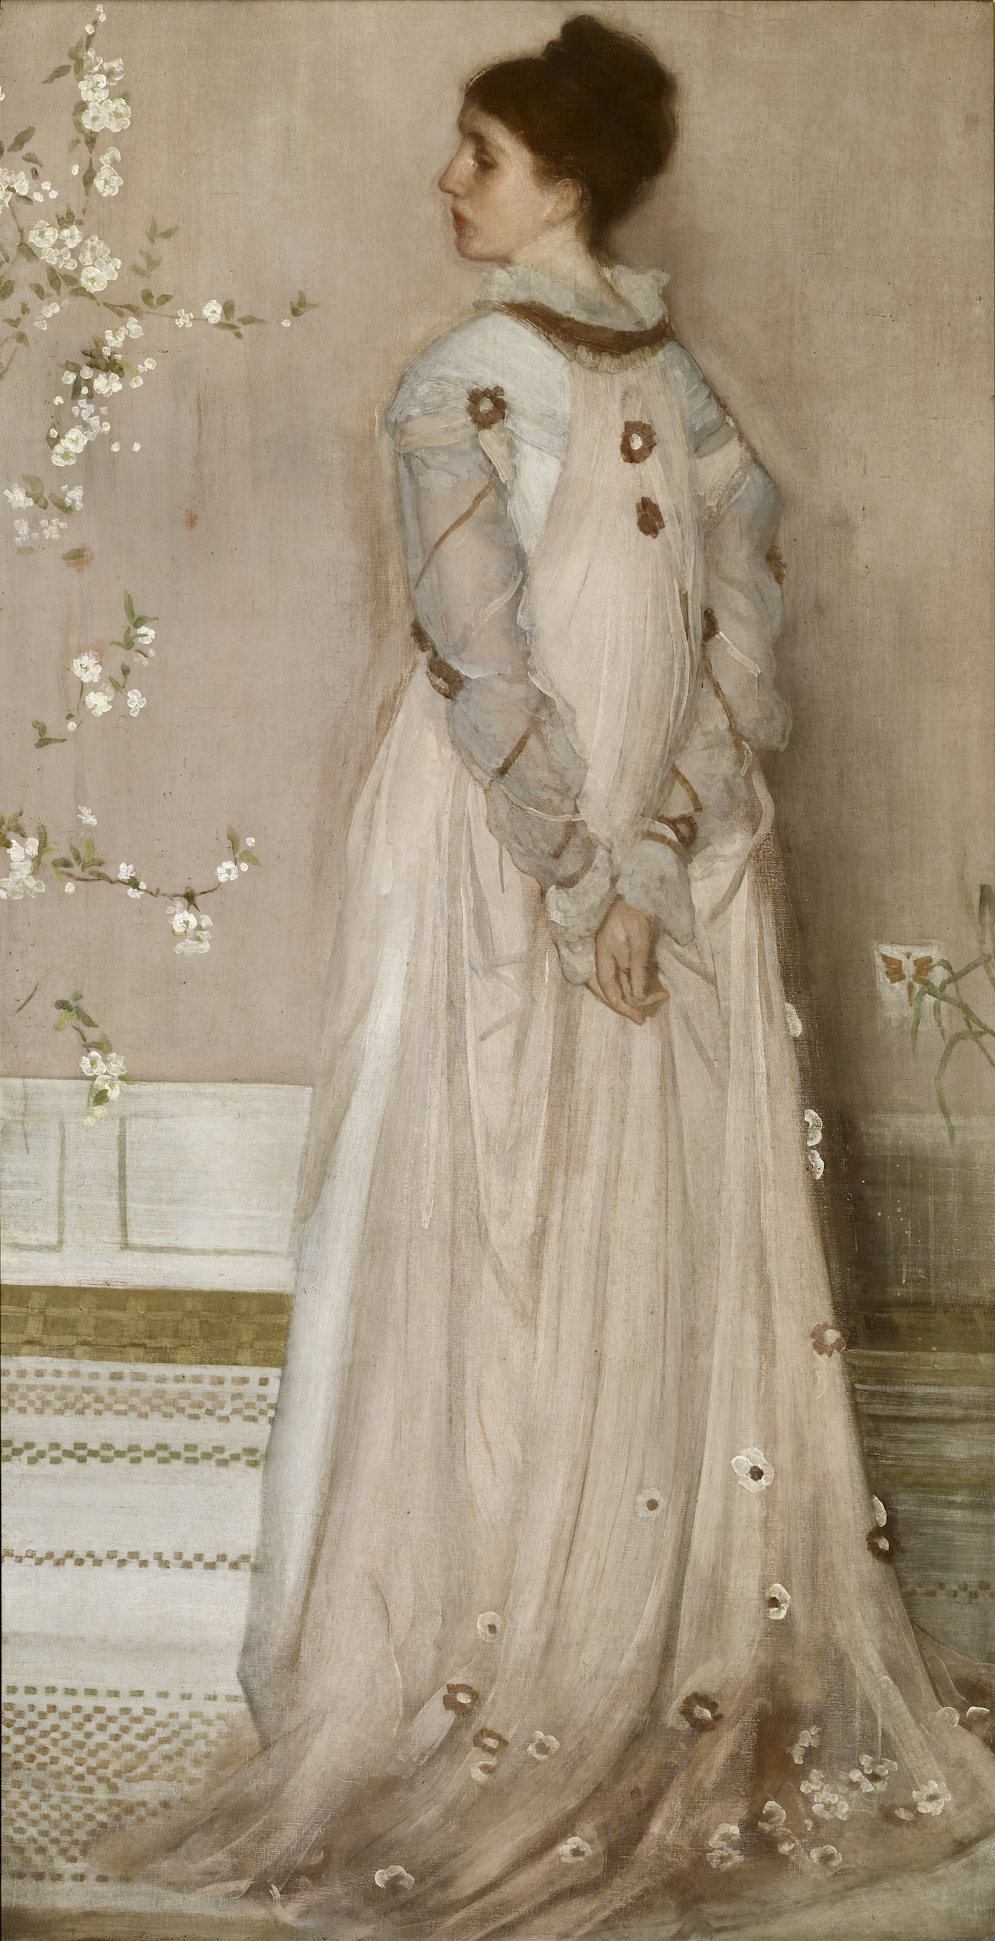 Symphony in Flesh Color and Pink: Portrait of Mrs. Frances Leyland by James Abbott McNeill Whistler - 1871–74 - 77 1/8 x 40 1/4 inches The Frick Collection